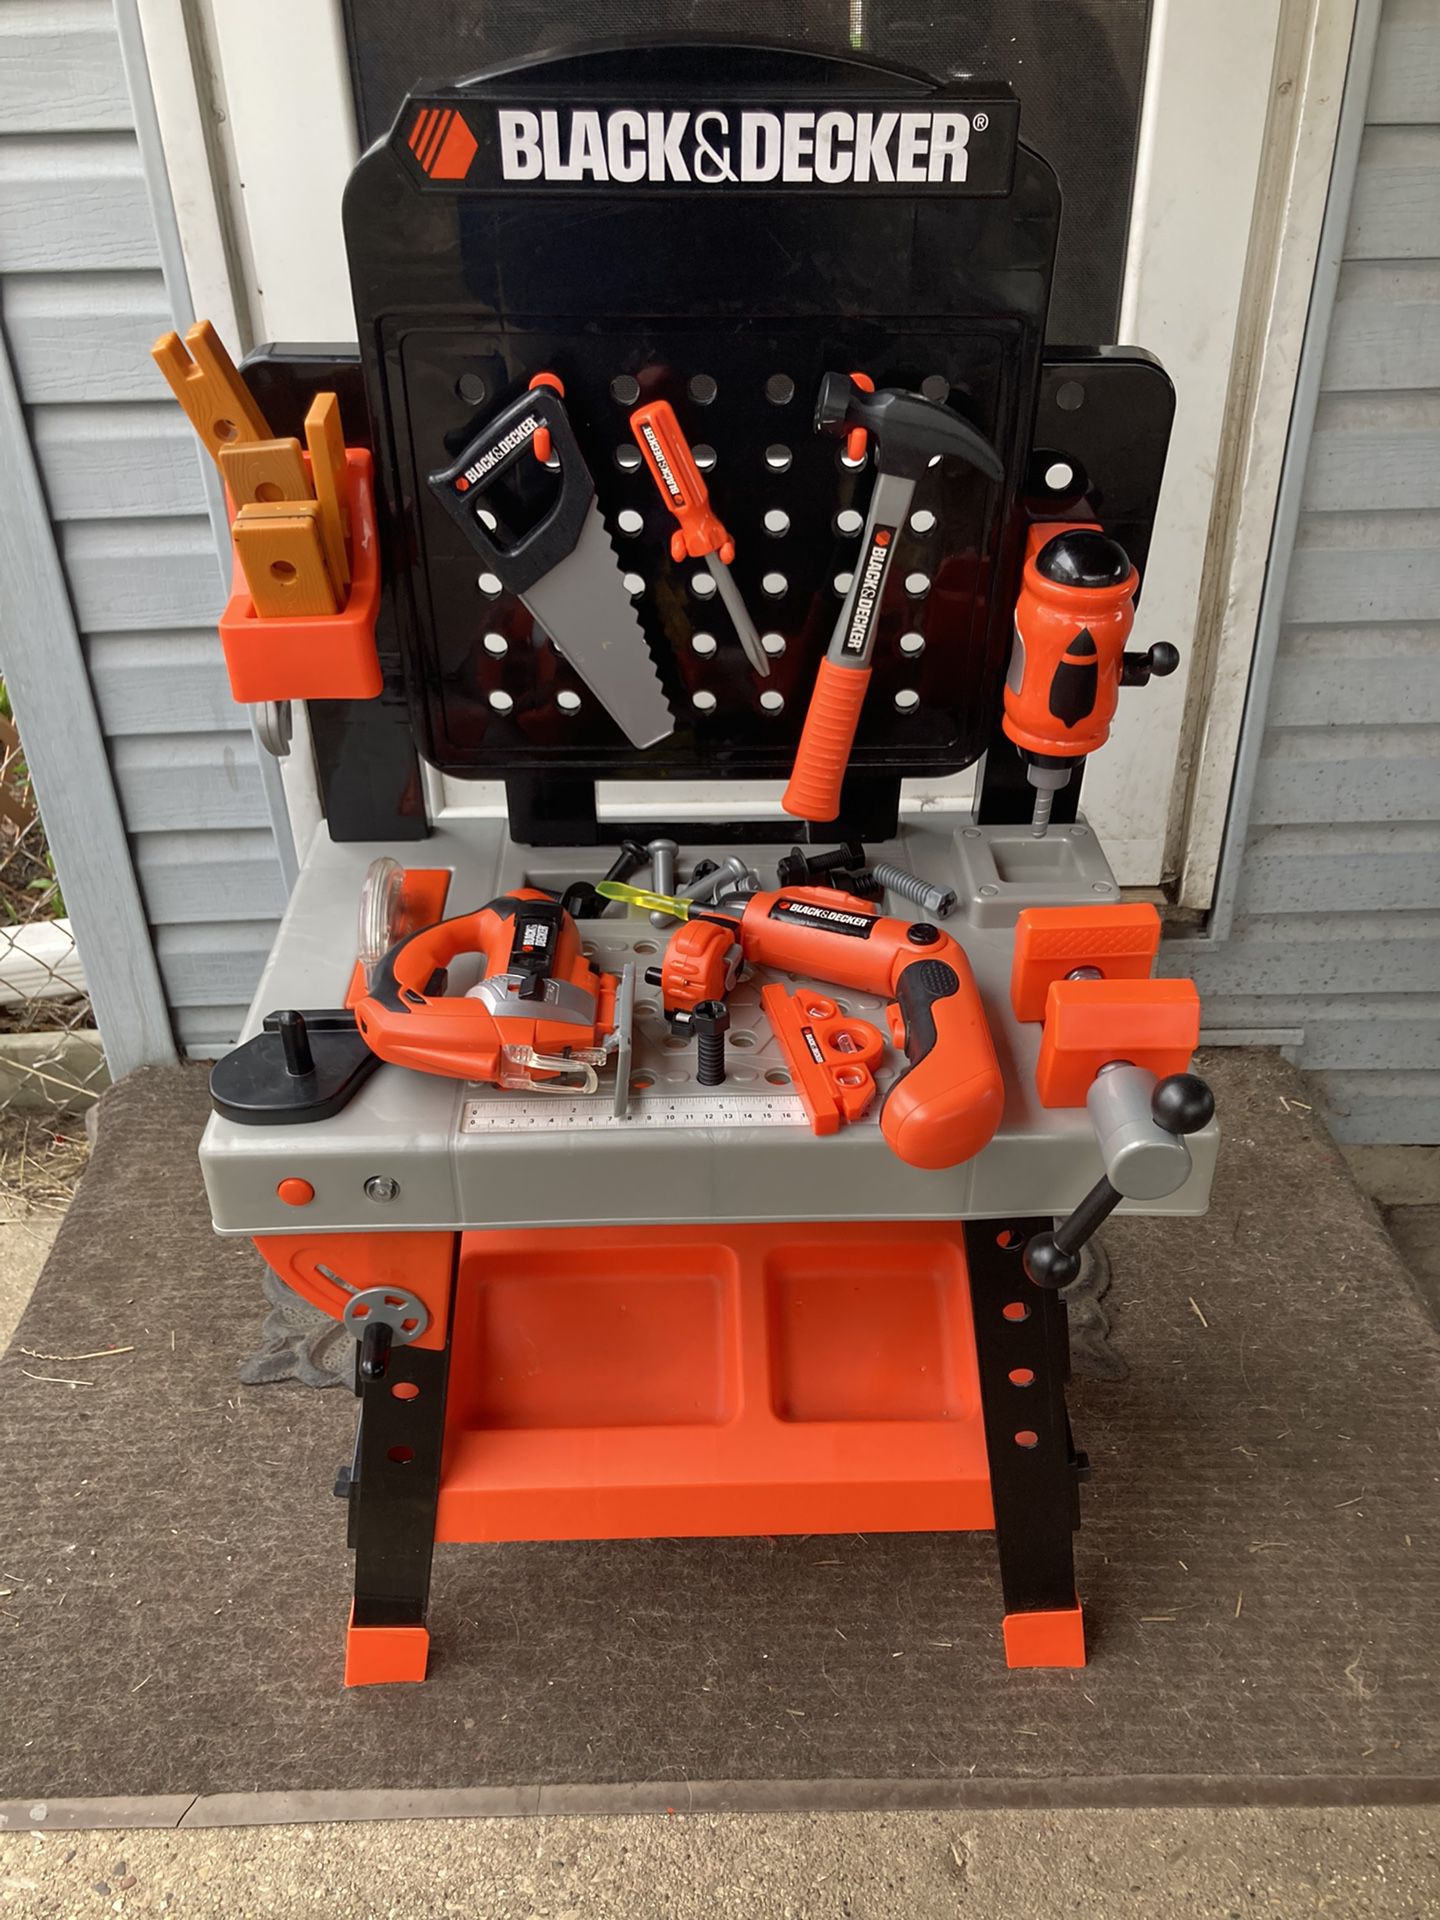 BLACK+DECKER Ready to Build Workbench Toy for Sale in Melrose Park